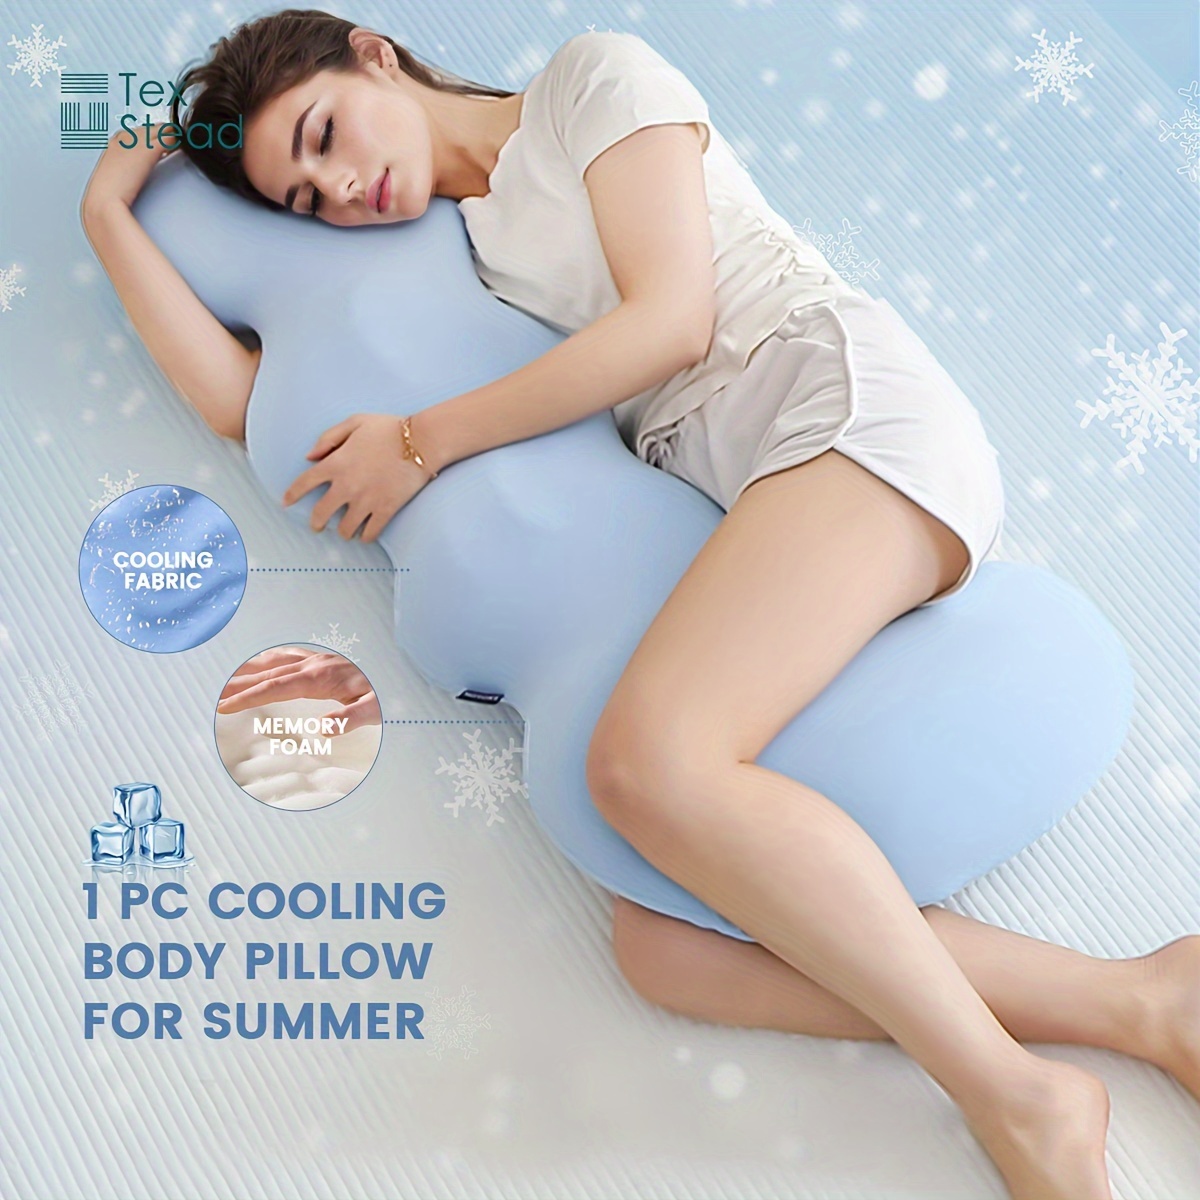 

Texstead Cooling Memory Foam Body Pillow - Machine Washable Cover, Nylon & Spandex, Supports All Sleeping Positions - Breathable Woven Fabric, Special Cooling Feature For Comfort In Summer - 1 Pc